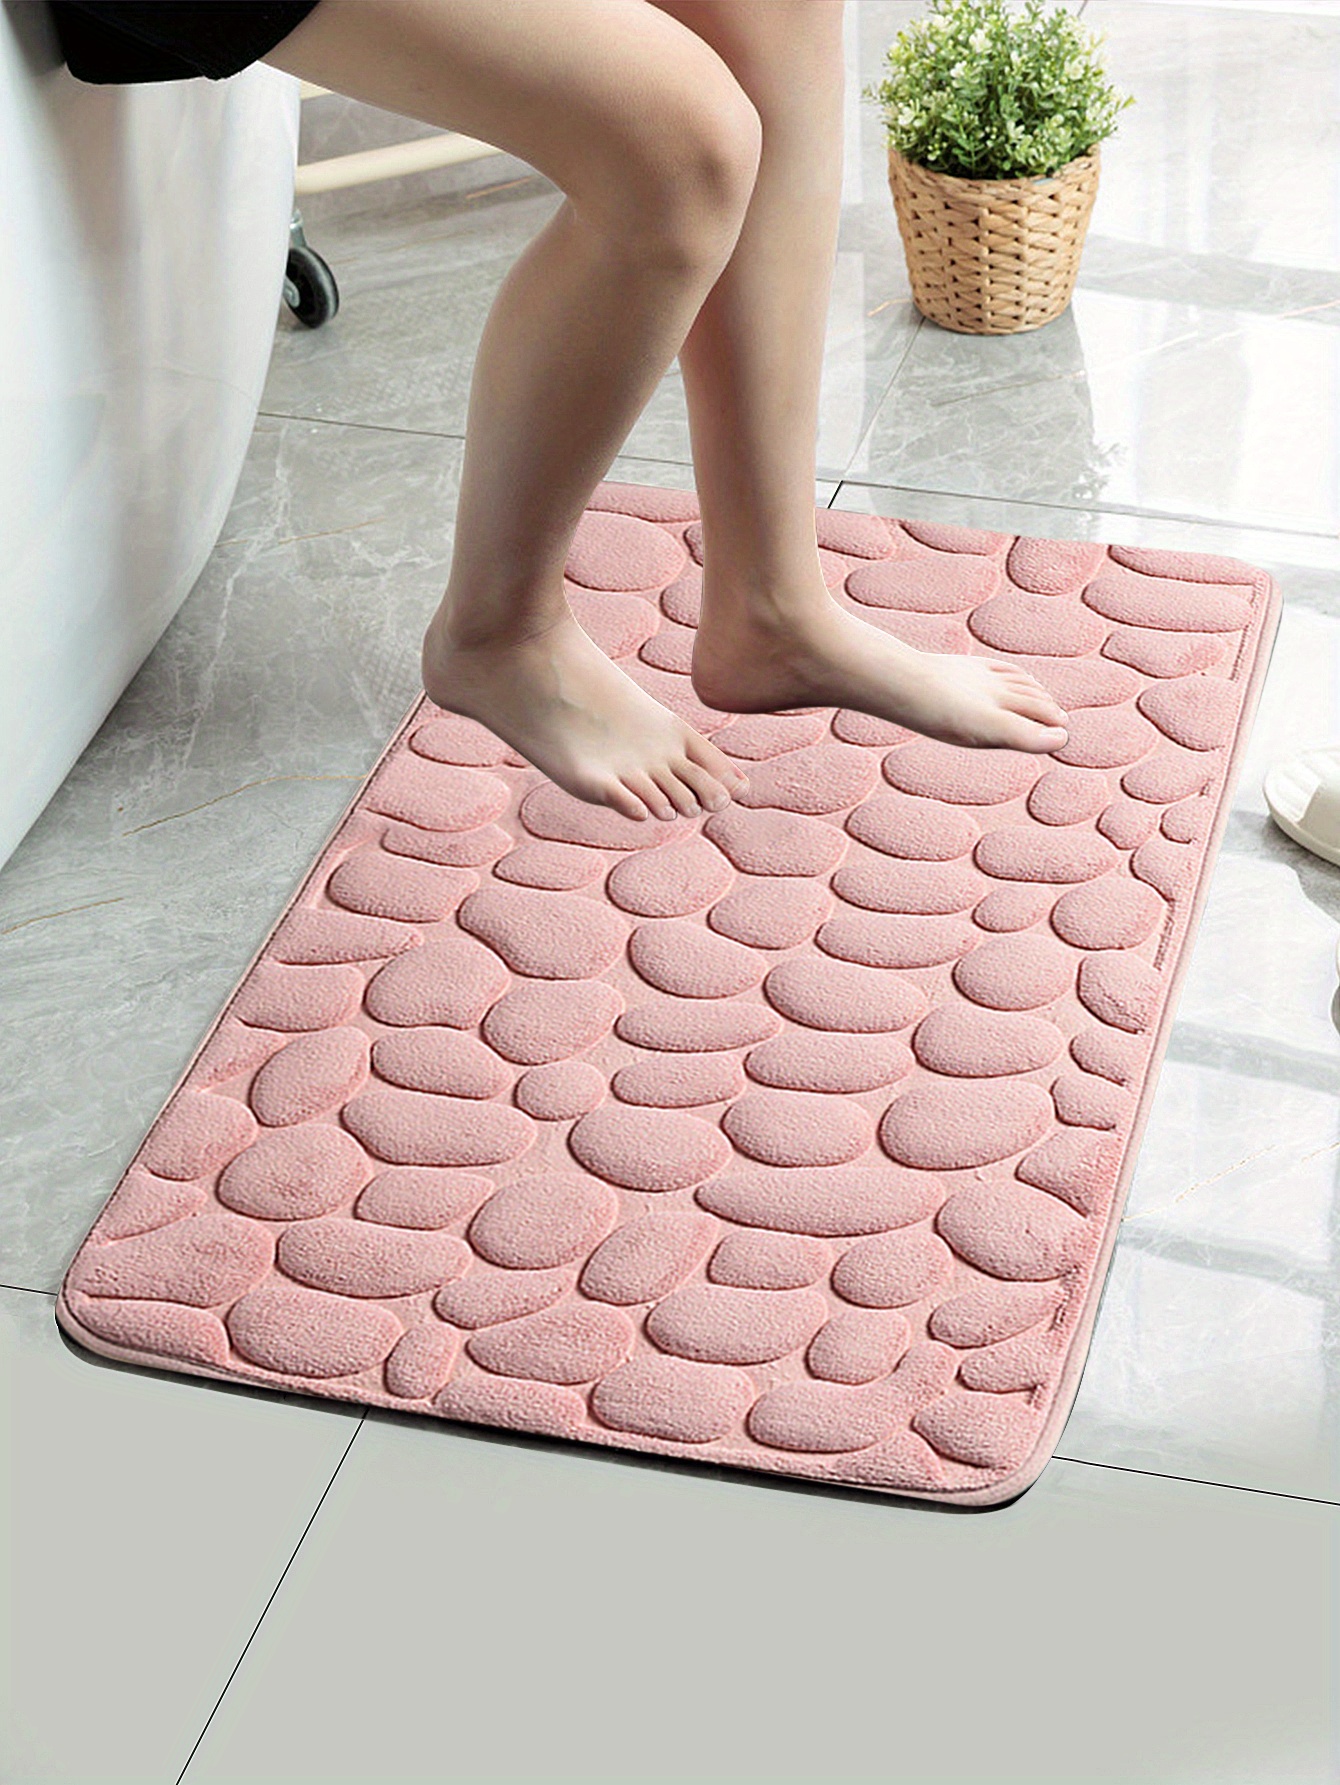 1pc Memory Foam Bathroom floor mats, Cobblestone Embossed Bathroom Mat,  Rapid Water Absorbent And Washable Bath Rugs, Non-Slip, Thick, Soft And